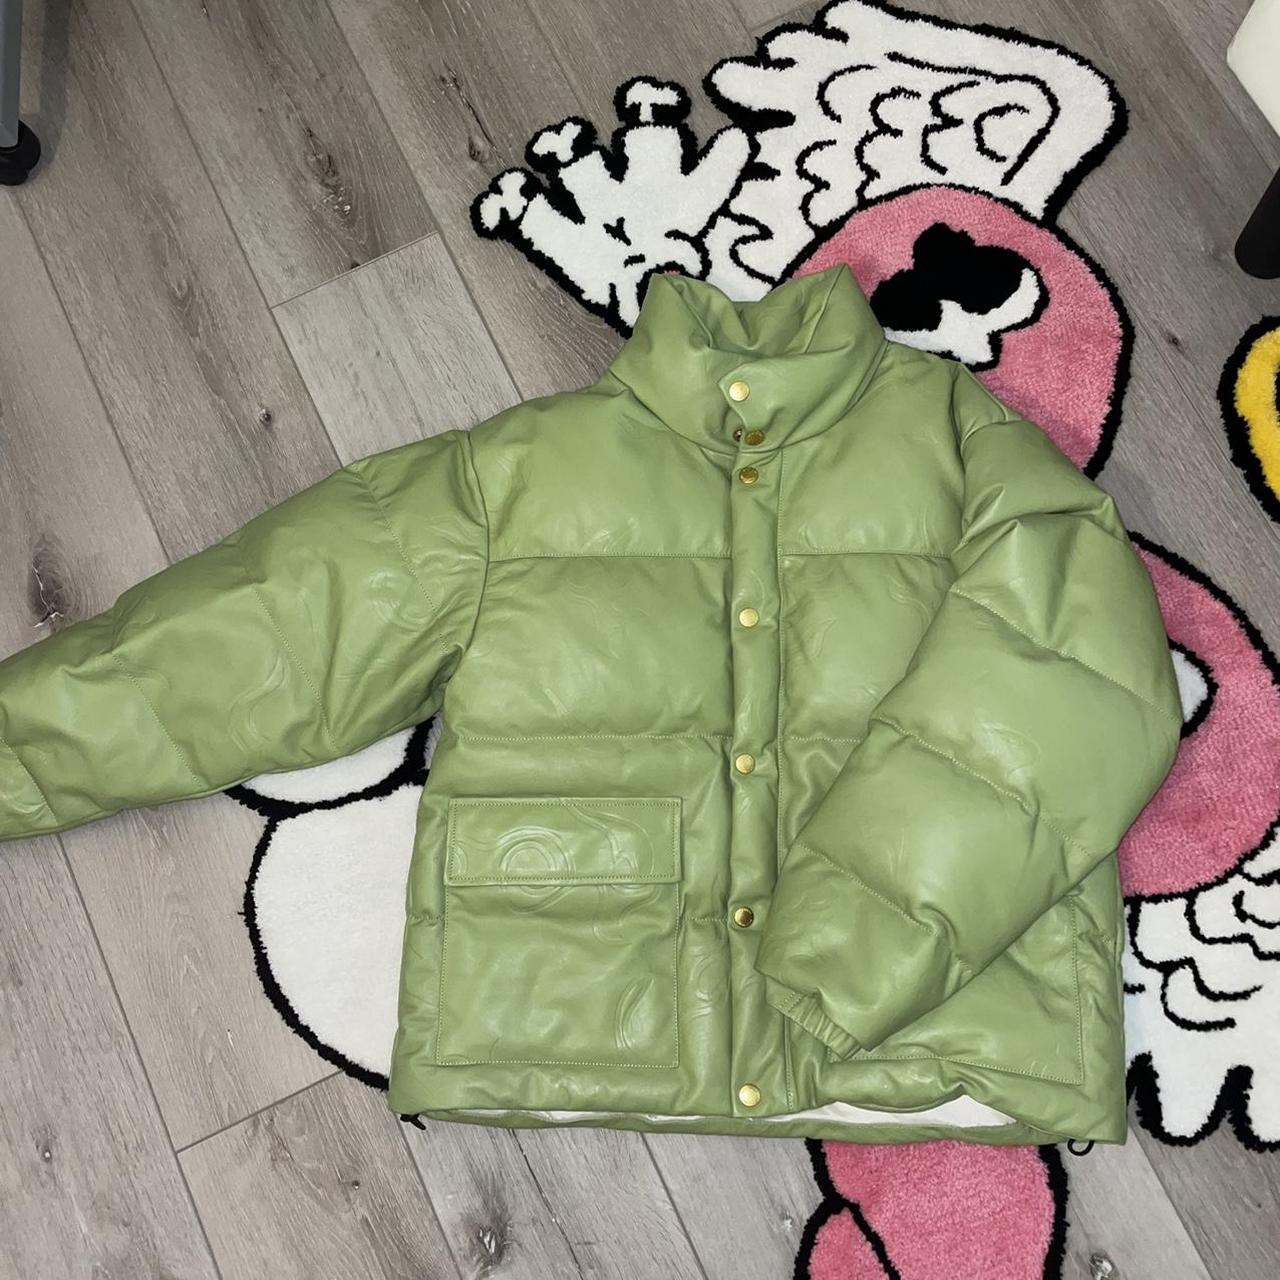 Golf Wang leather flame embossed puffer jacket - Depop